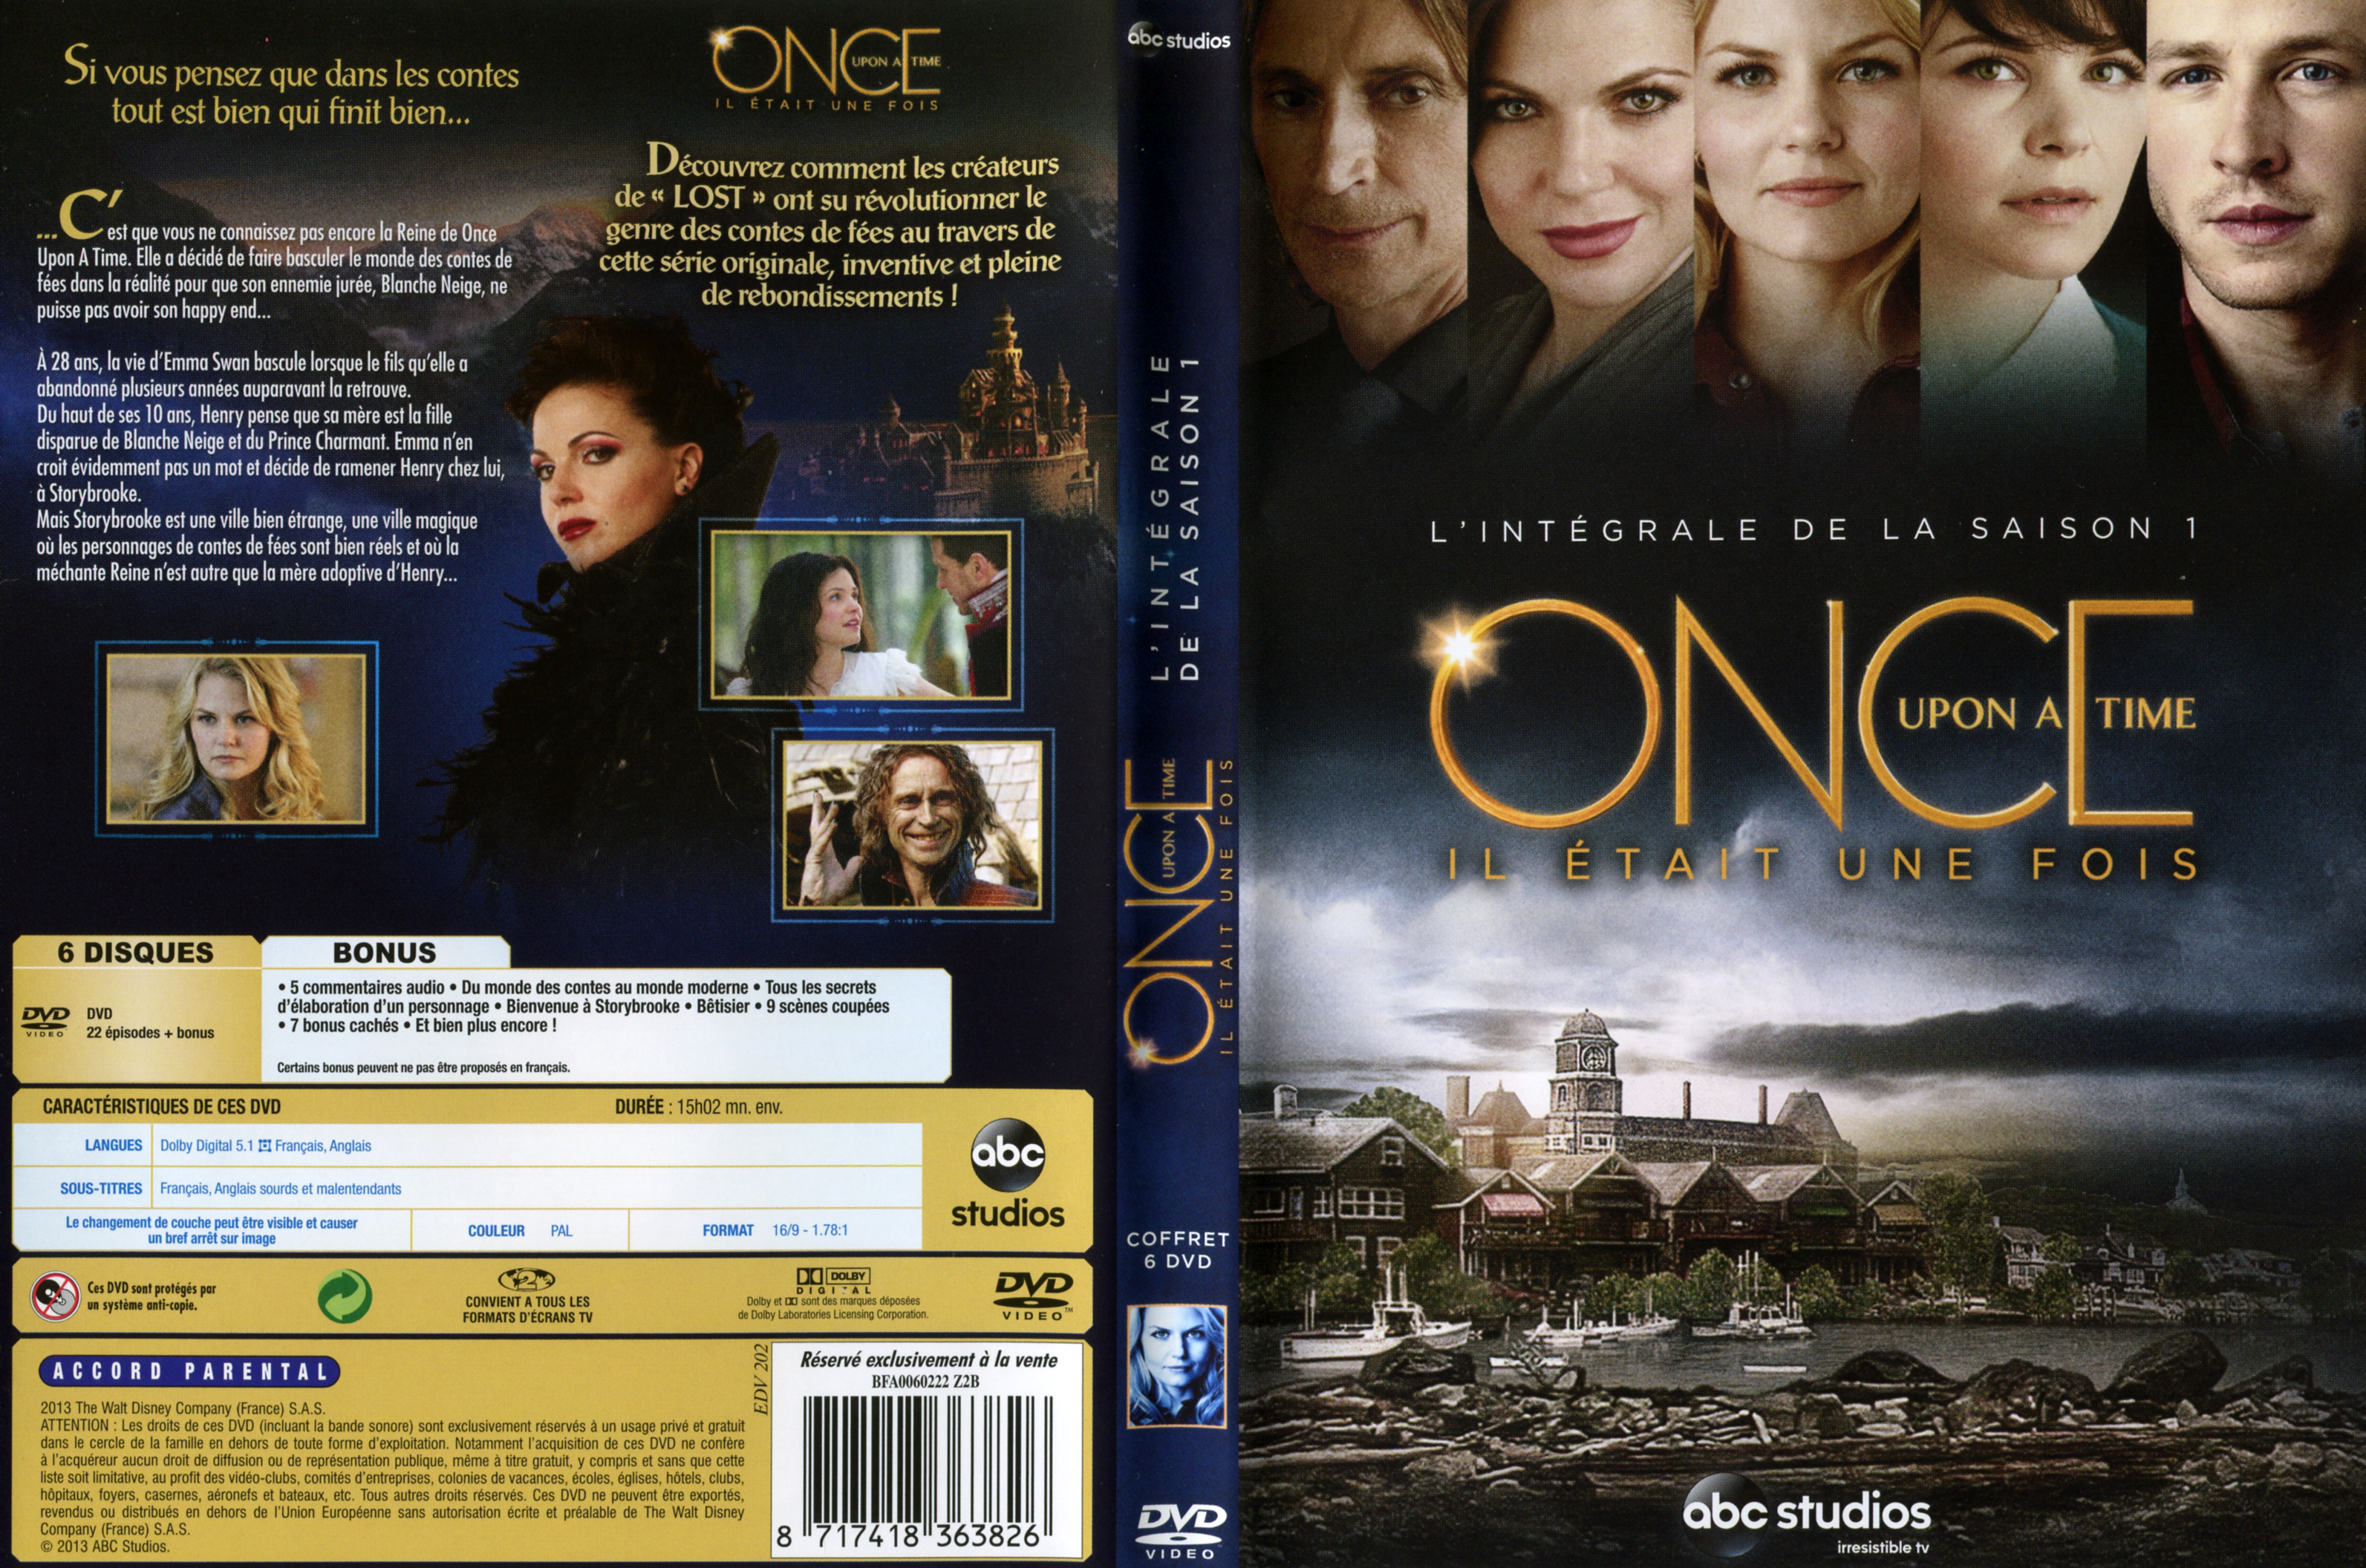 Jaquette DVD Once Upon a Time saison 1